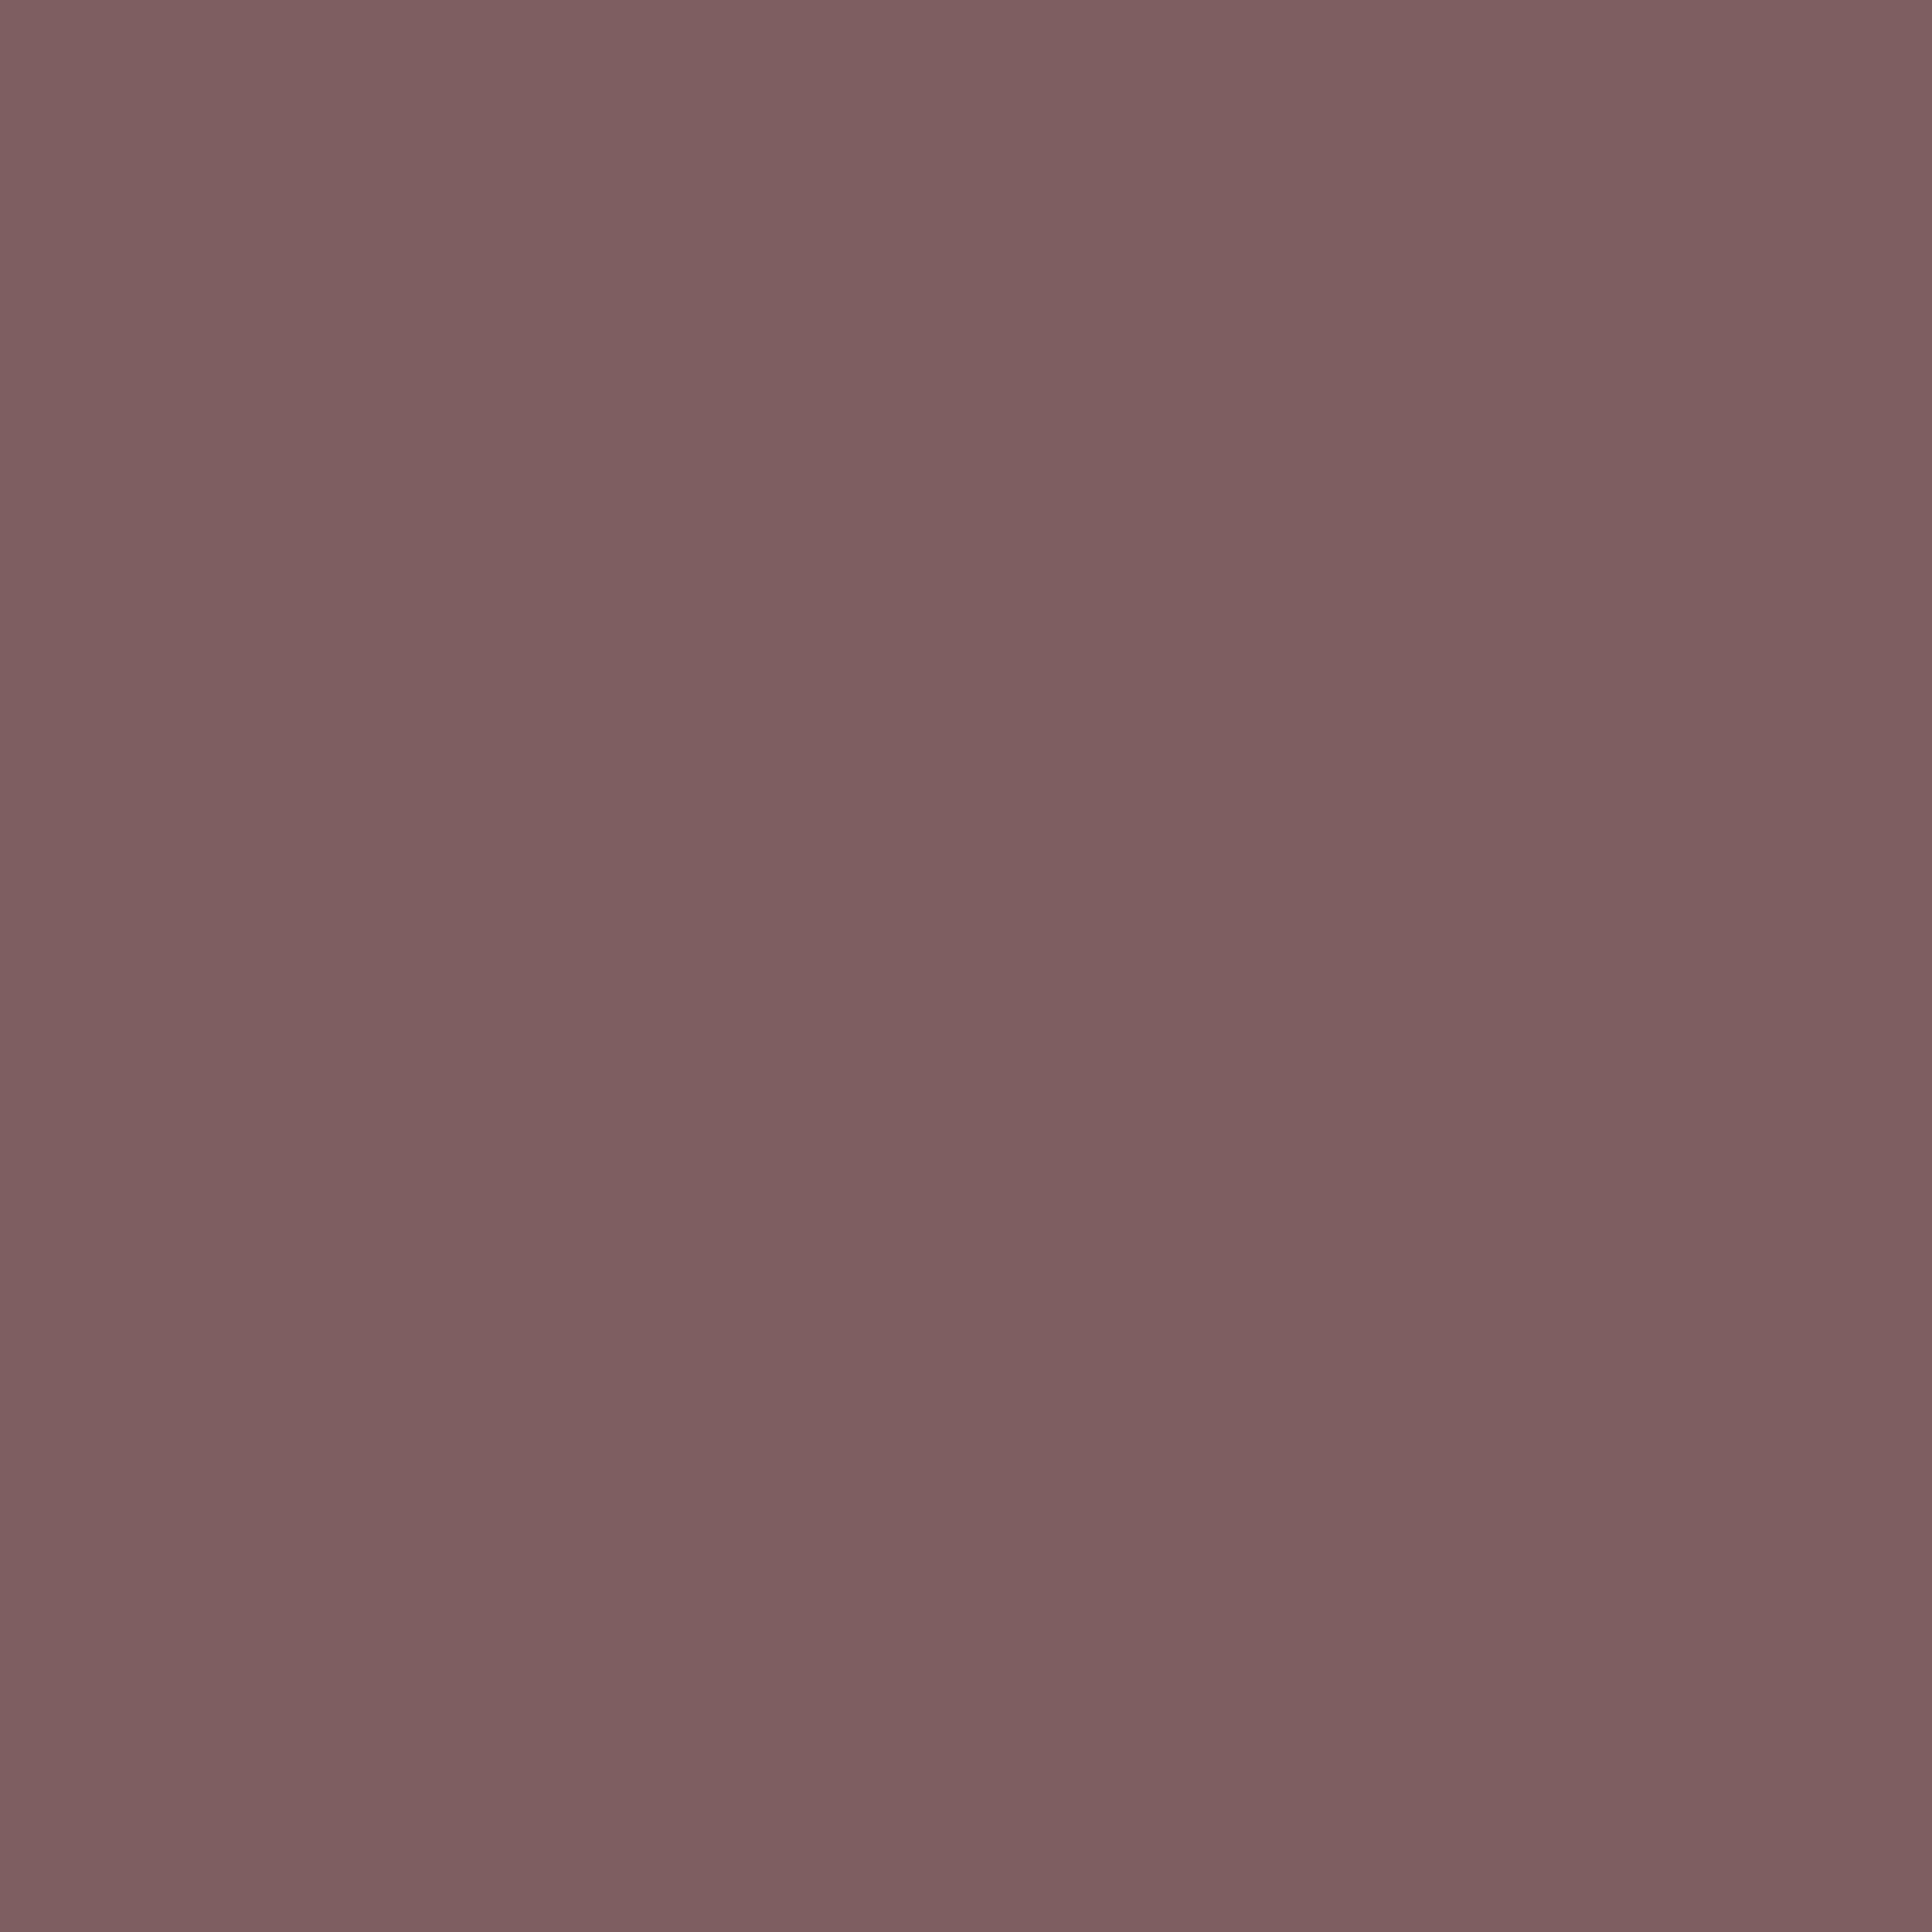 3600x3600 Deep Taupe Solid Color Background